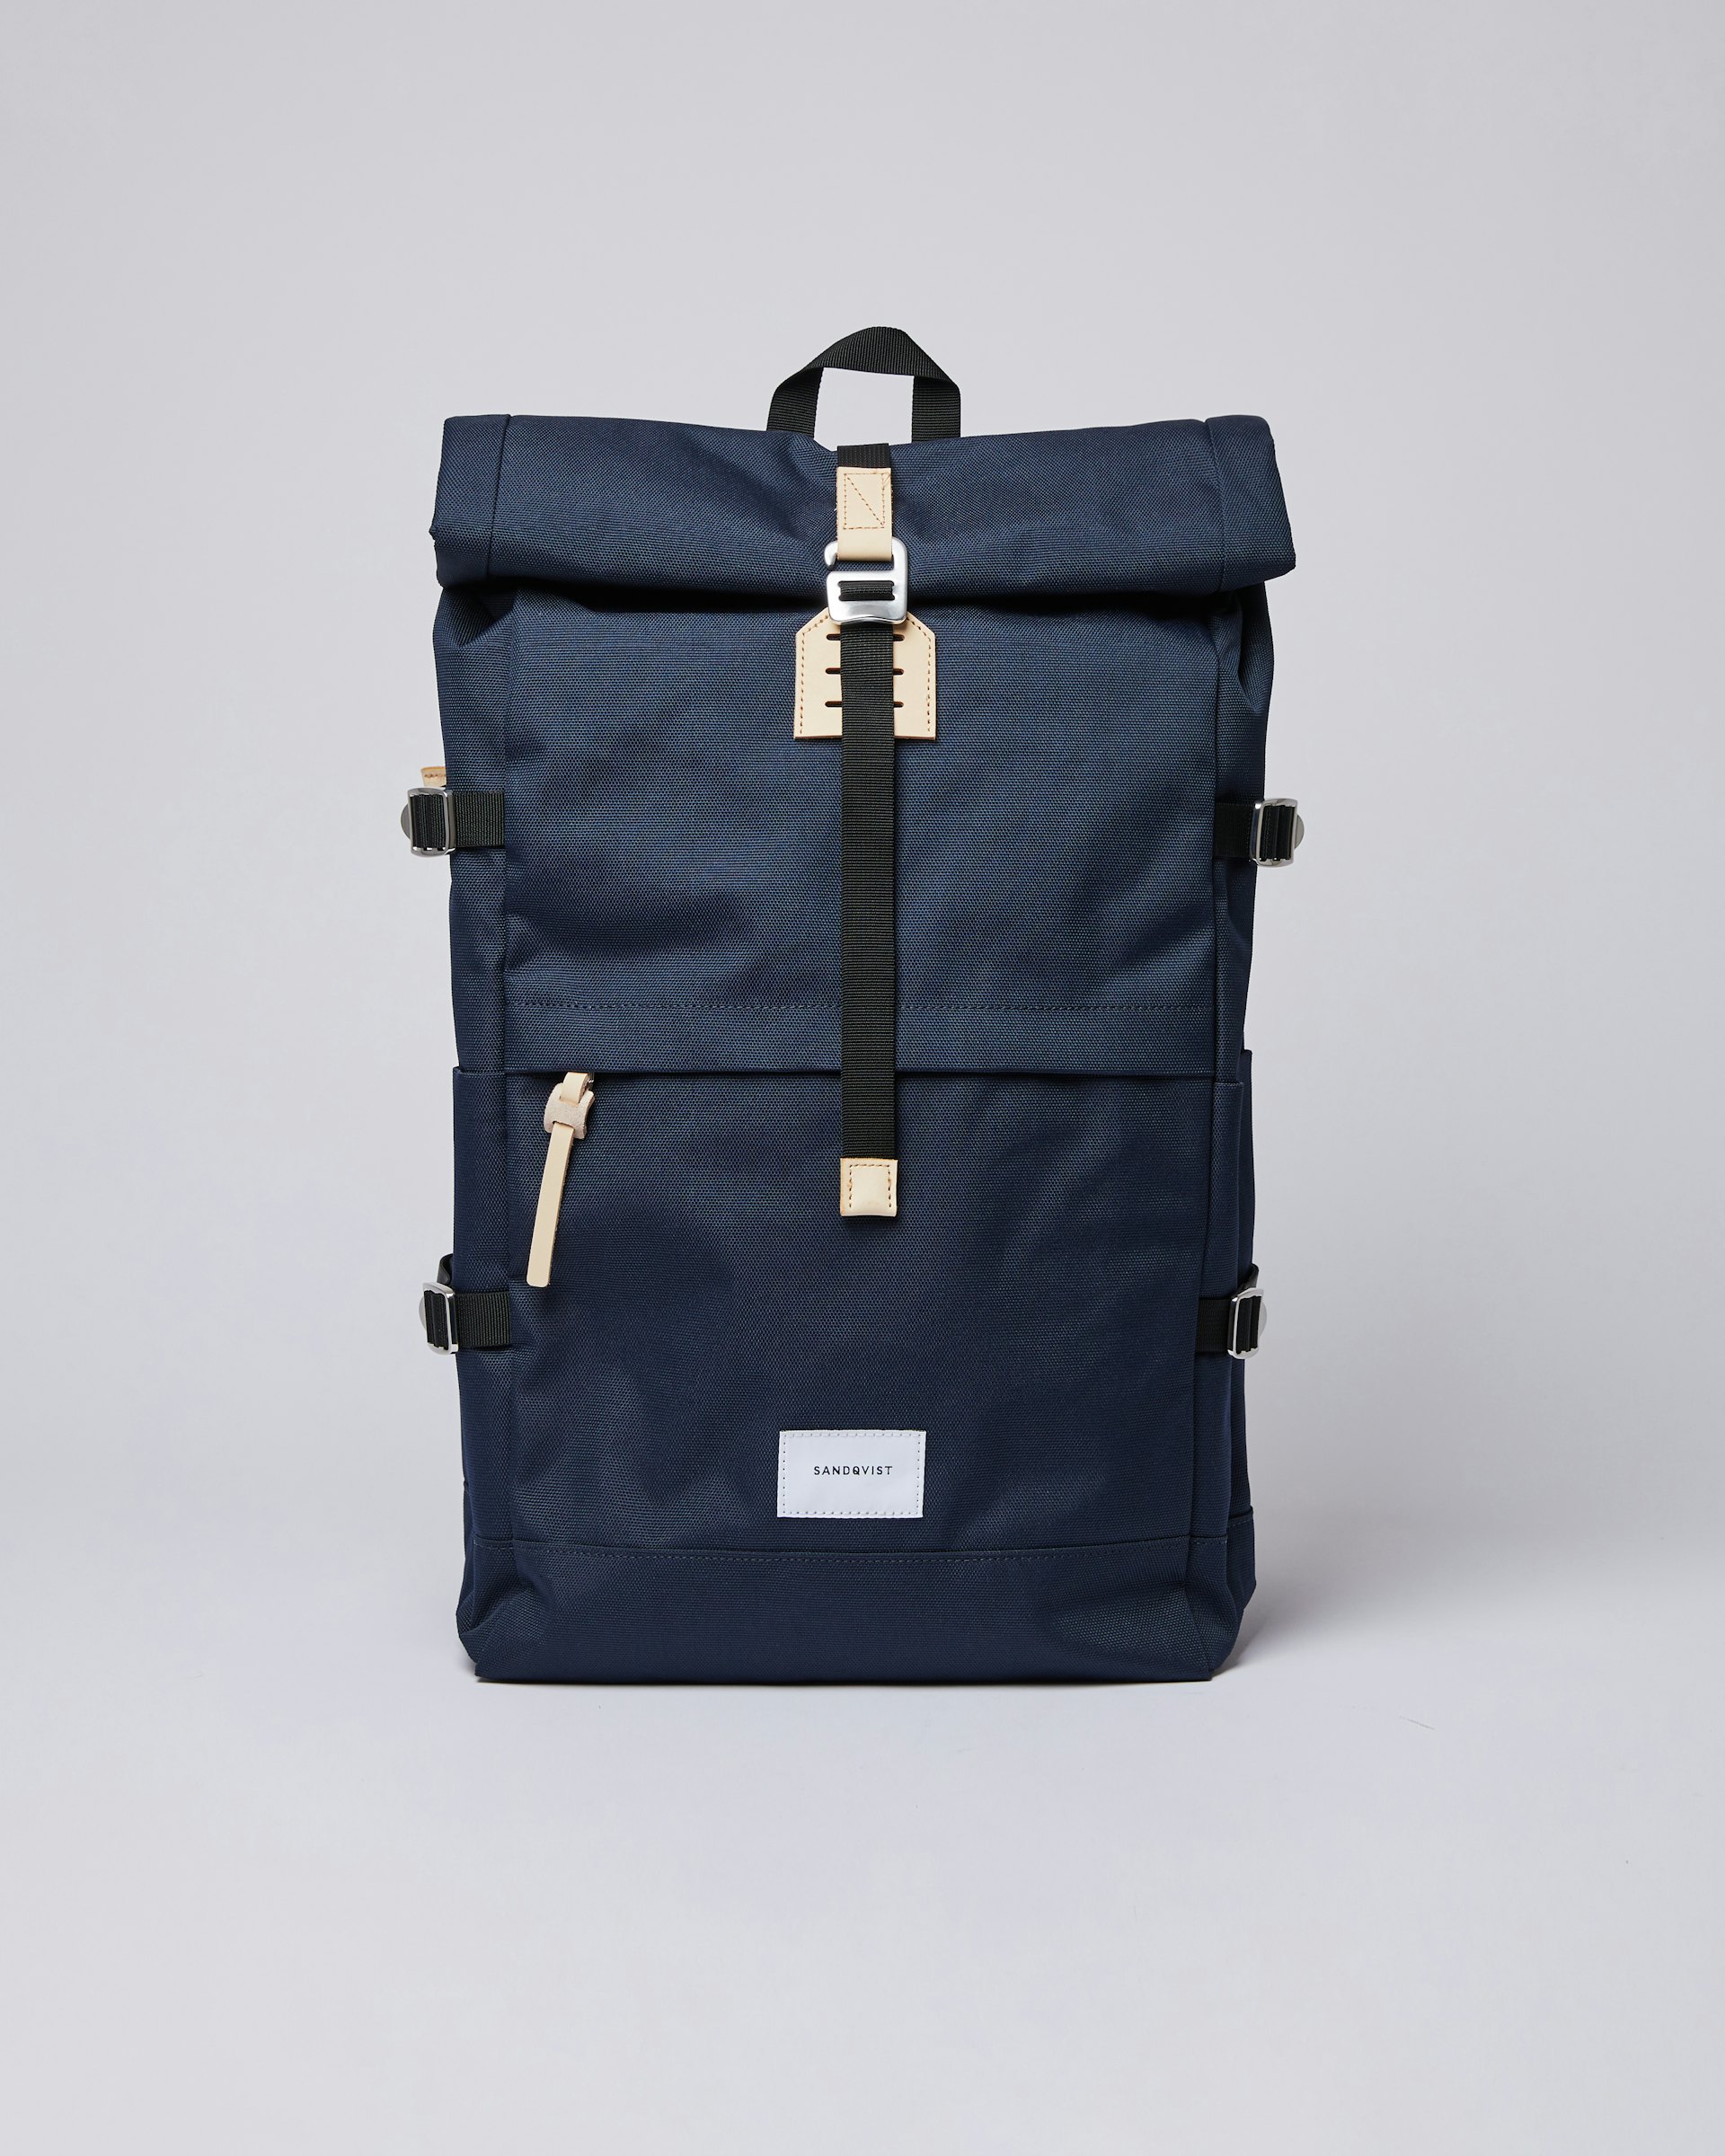 Bernt belongs to the category Sacs à dos and is in color navy